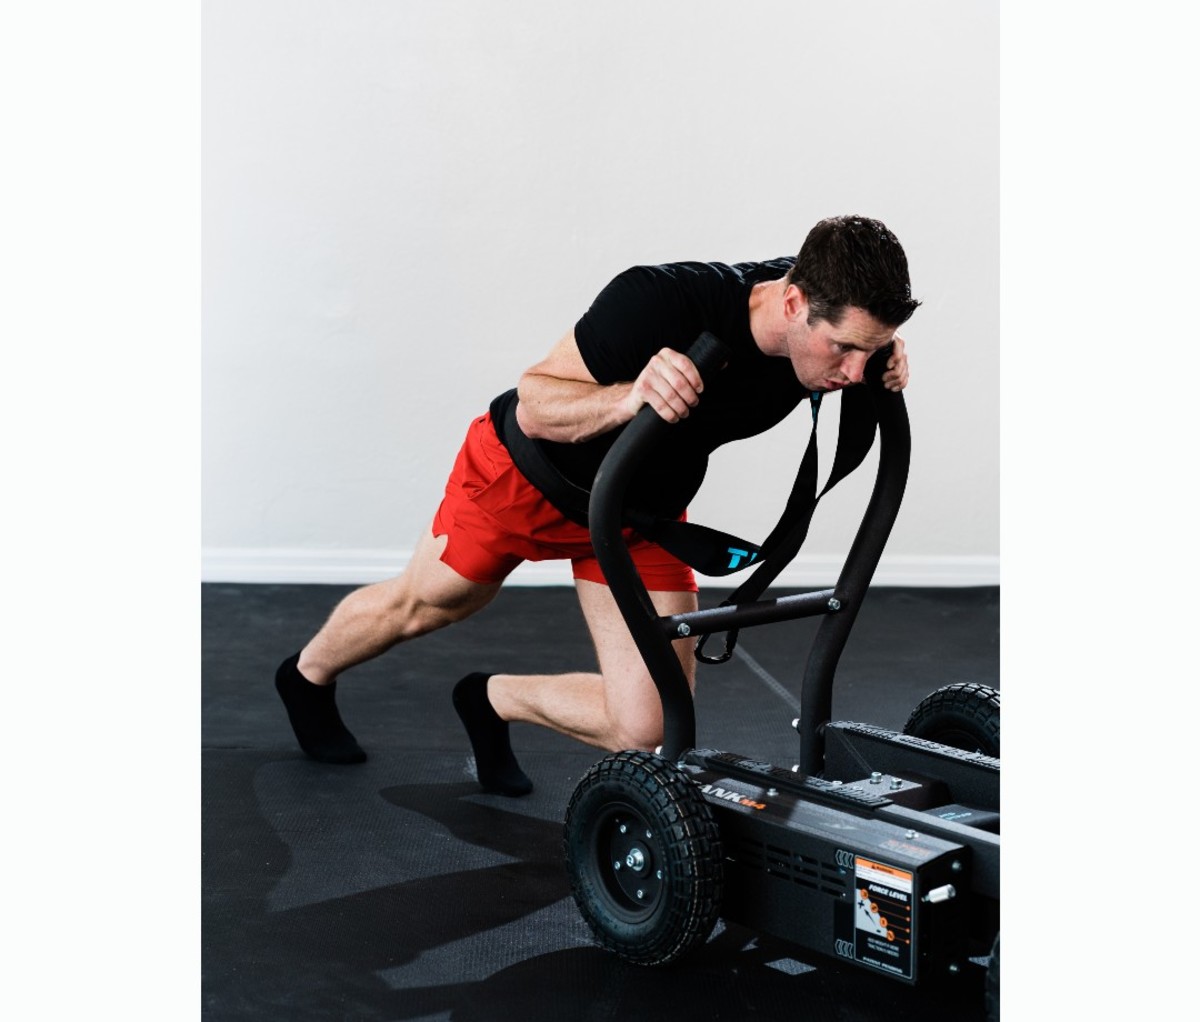 Caucasian man in black t-shirt and red shorts pushing sled